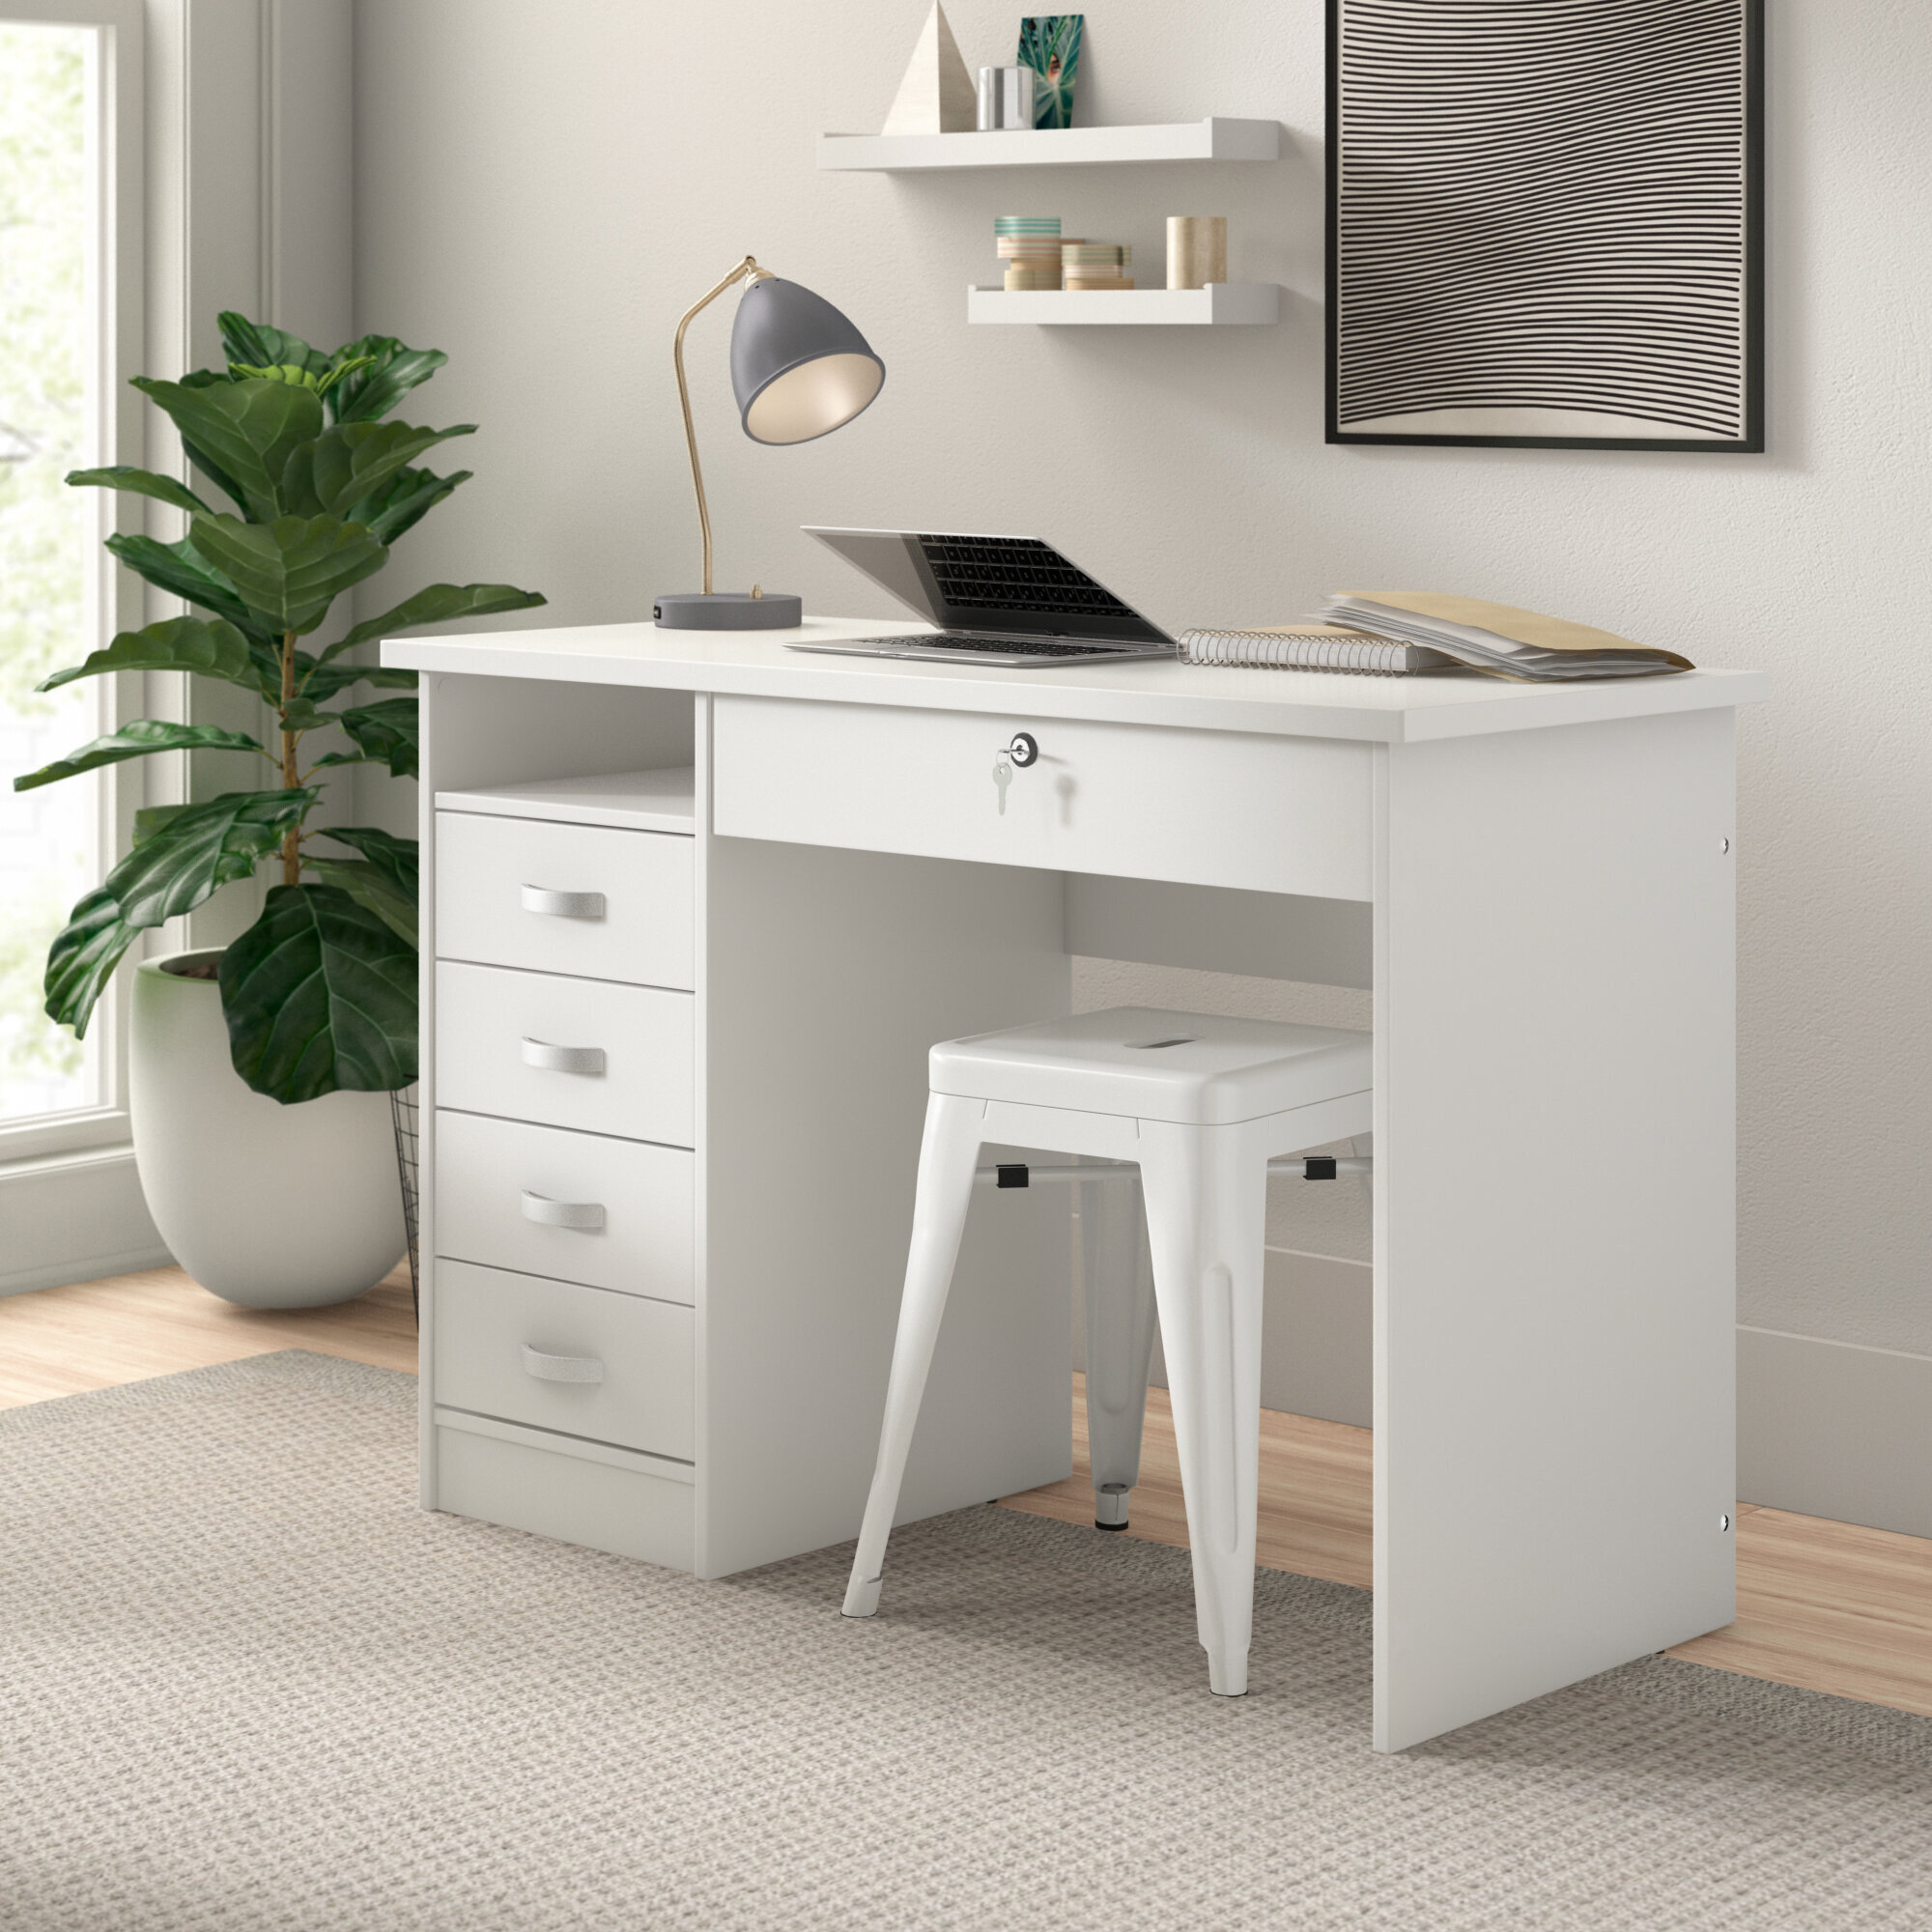 South Shore Small Computer Desk with Drawers Chocolate 